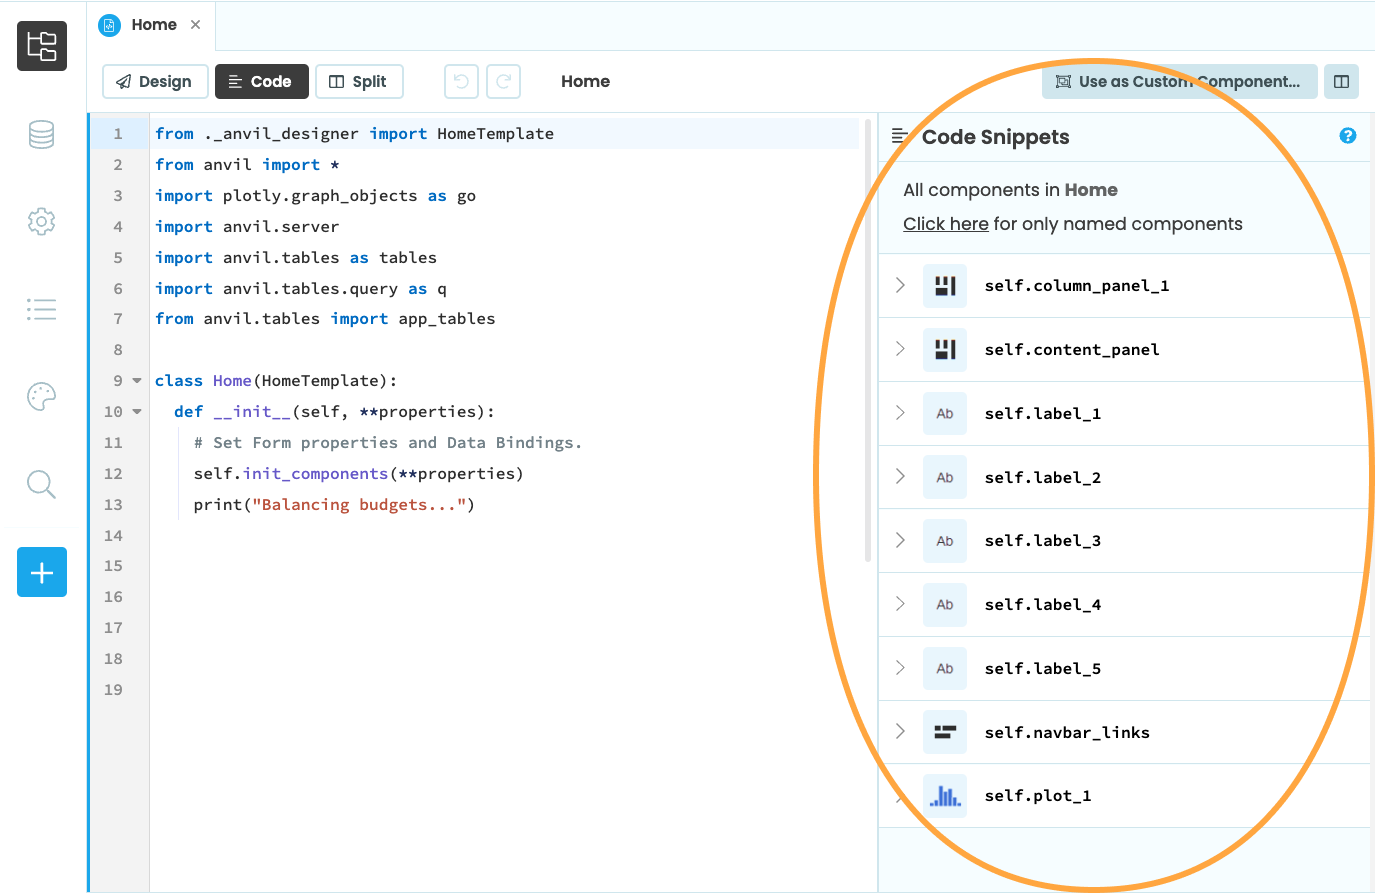 Code Snippets lists all the components in this Form.